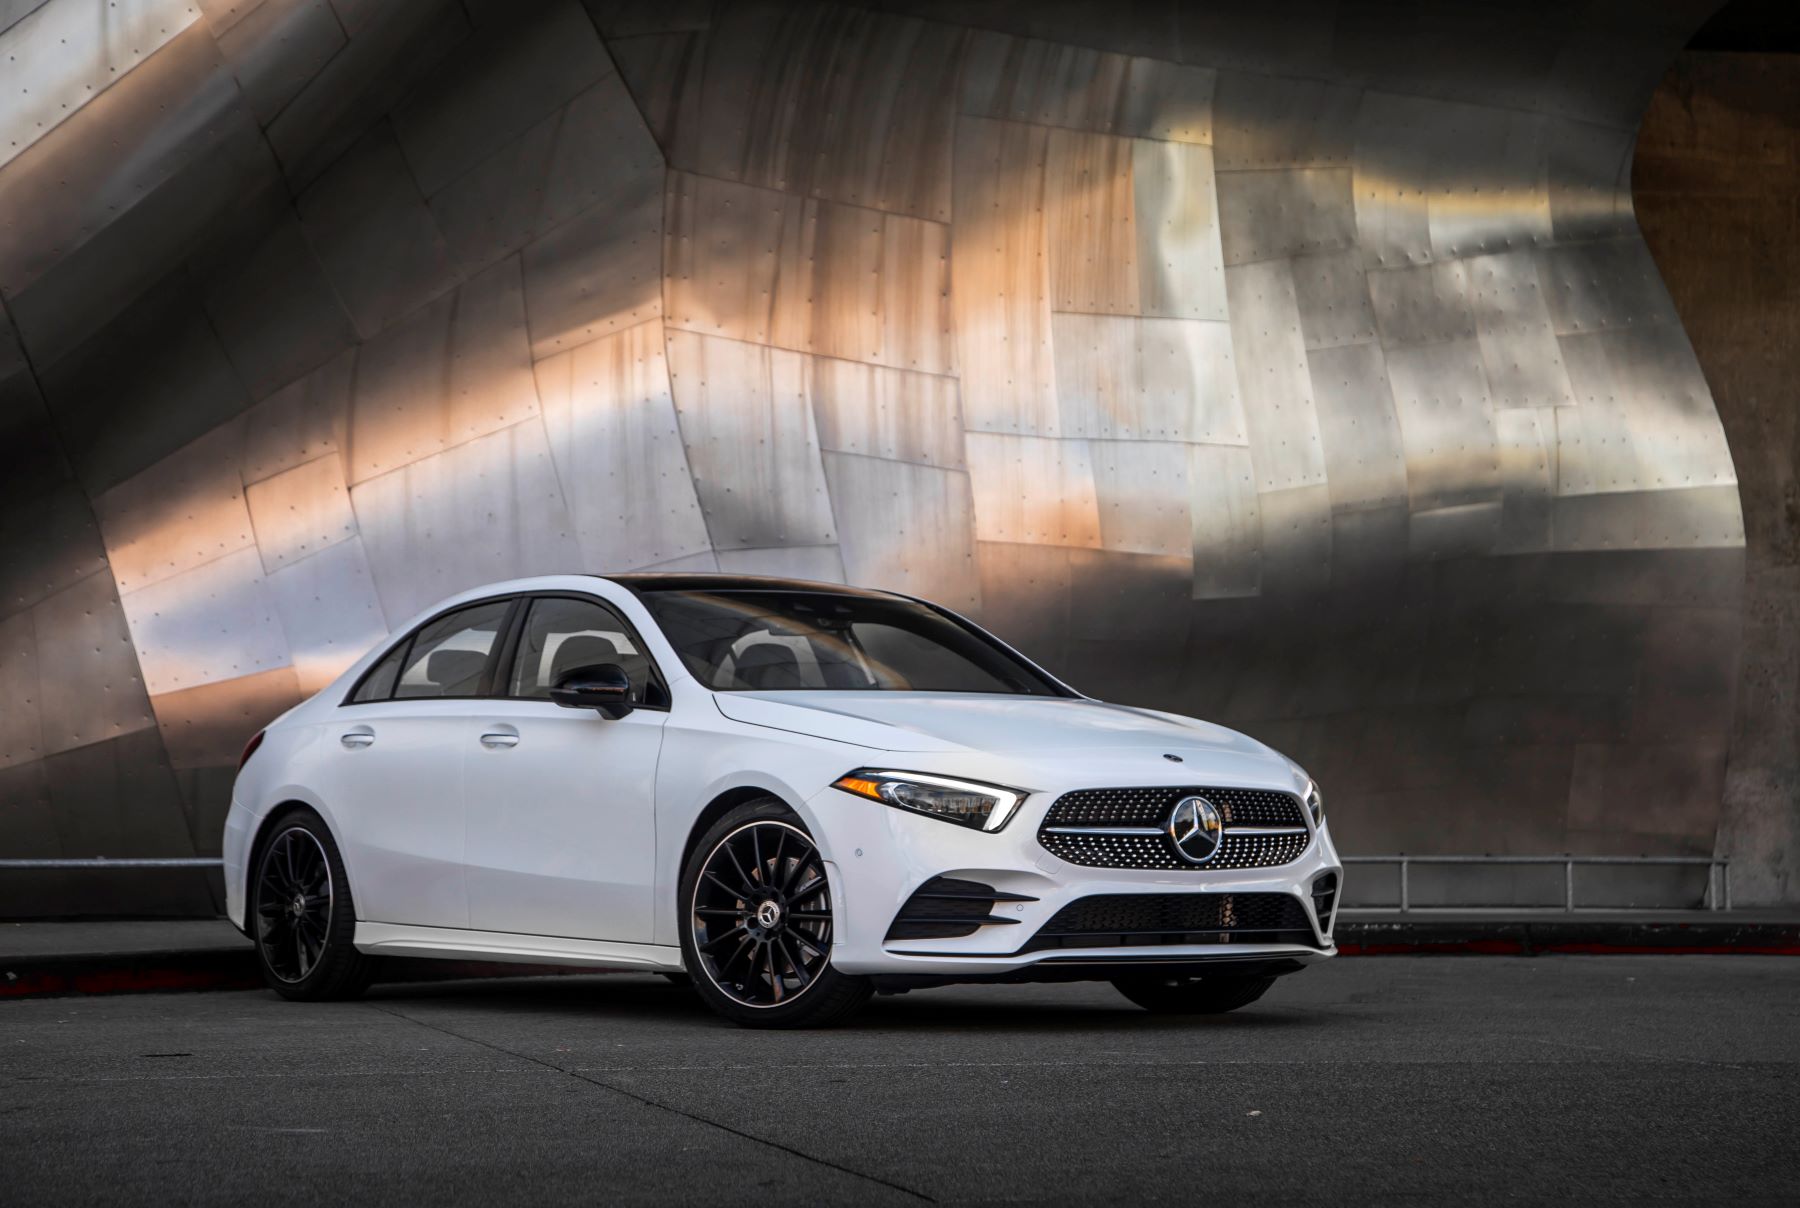 The 2019 Mercedes-Benz A-Class luxury subcompact sedan in white